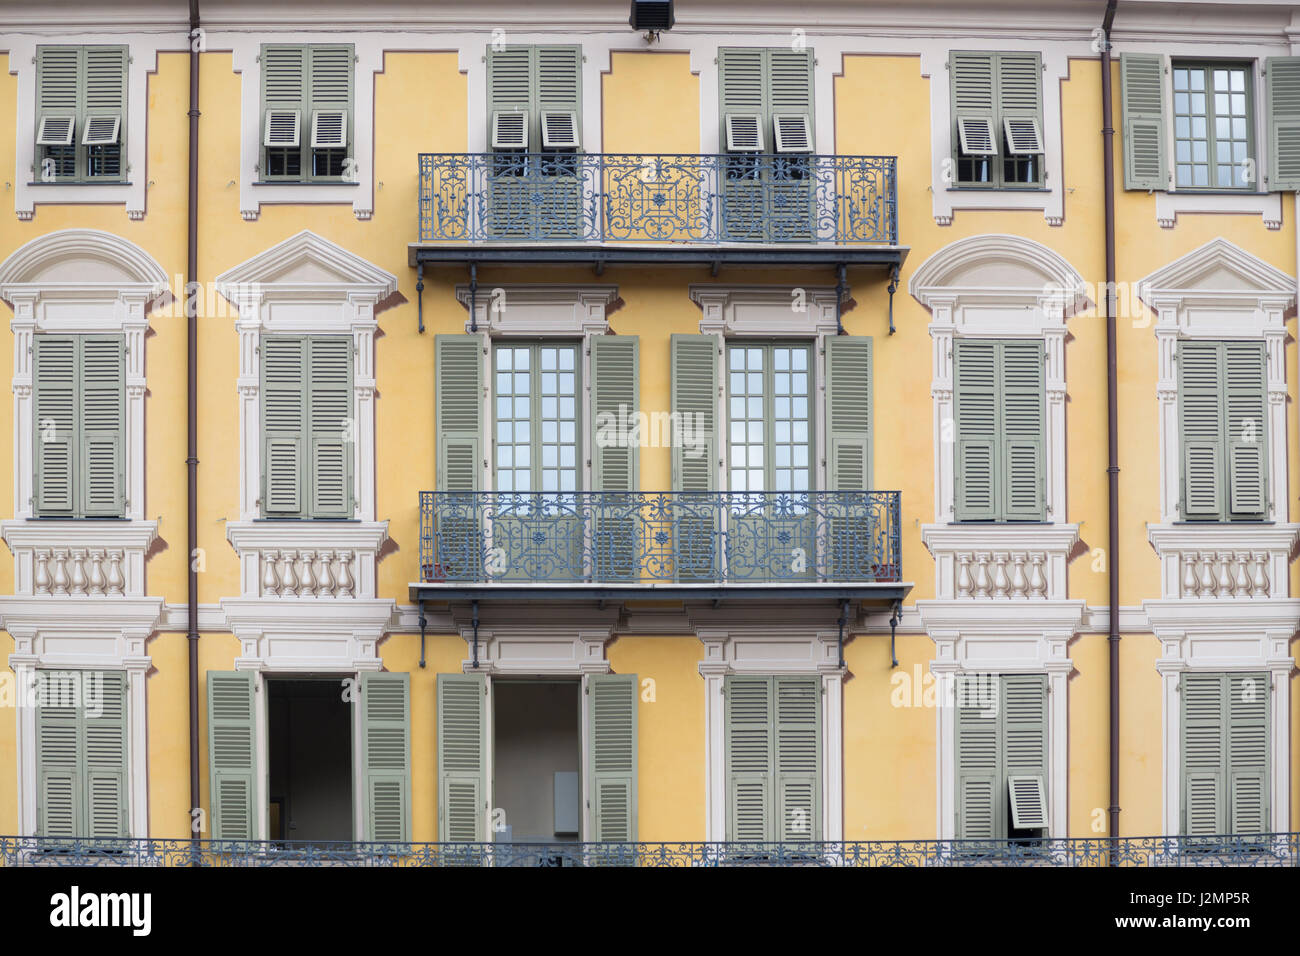 France, Nice, French architecture : shuttered windows and balconies in Place Garibaldi. Stock Photo